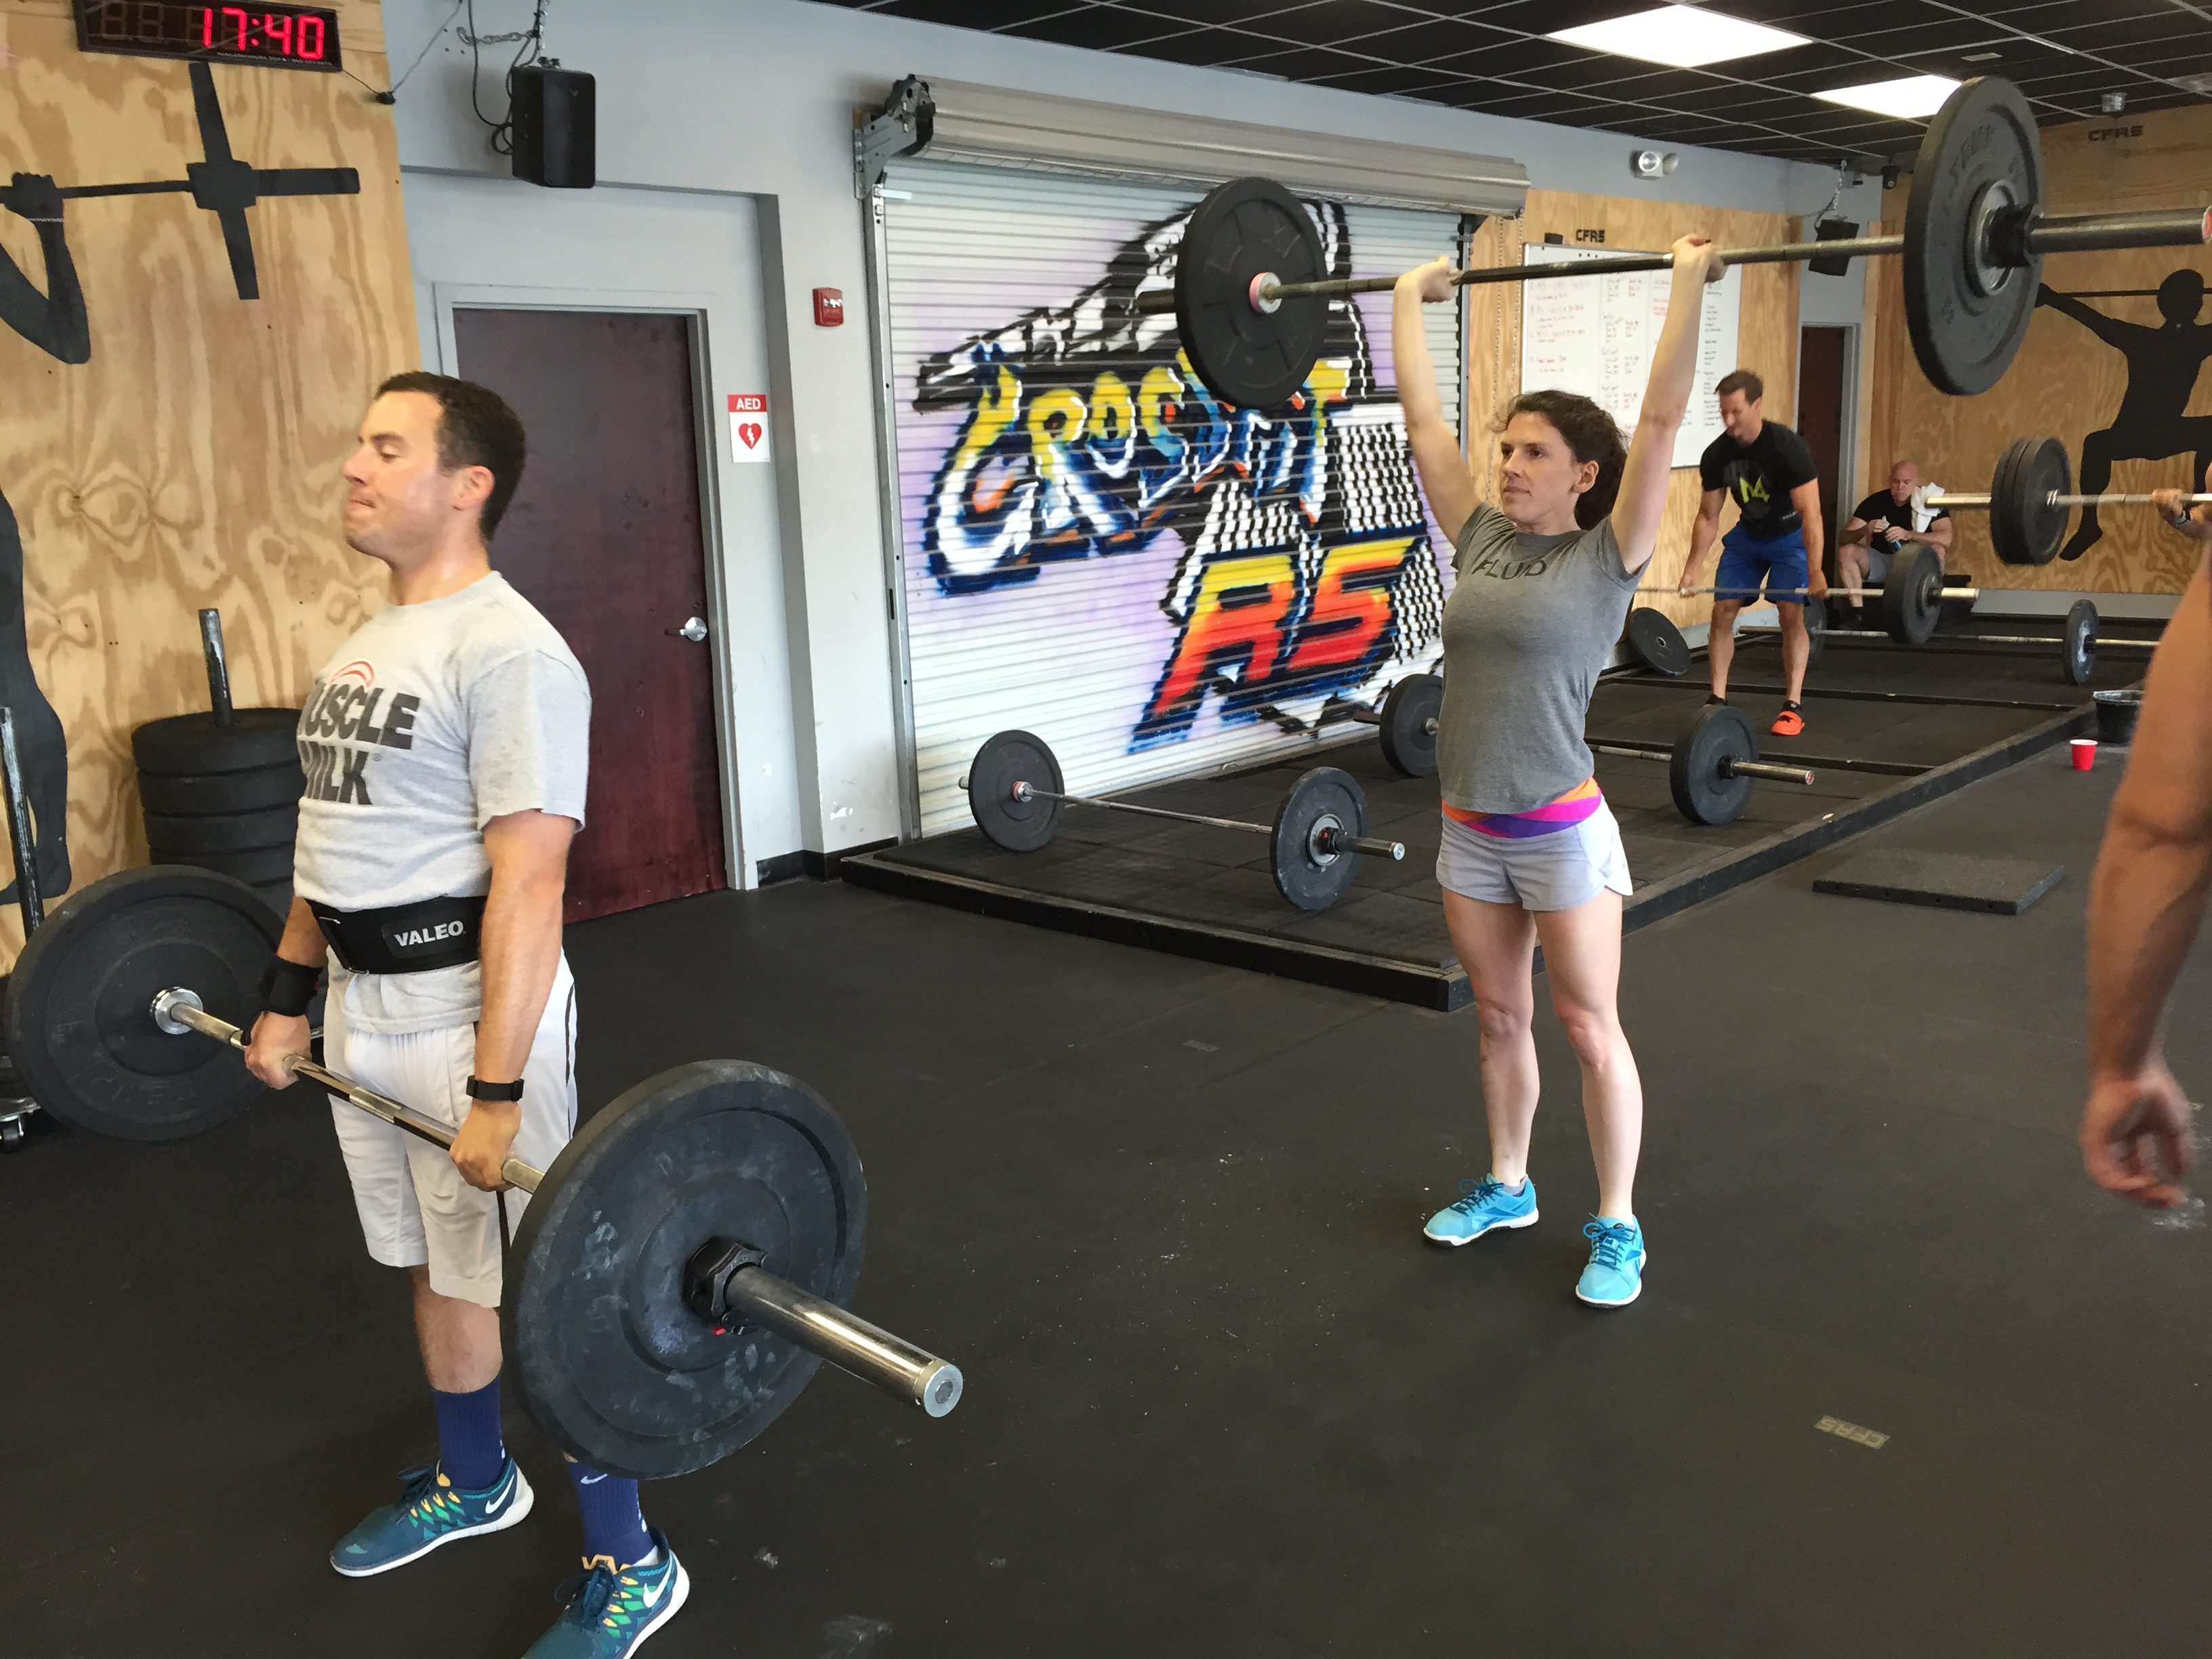 Tuesday 7.7.15 Competitor WOD